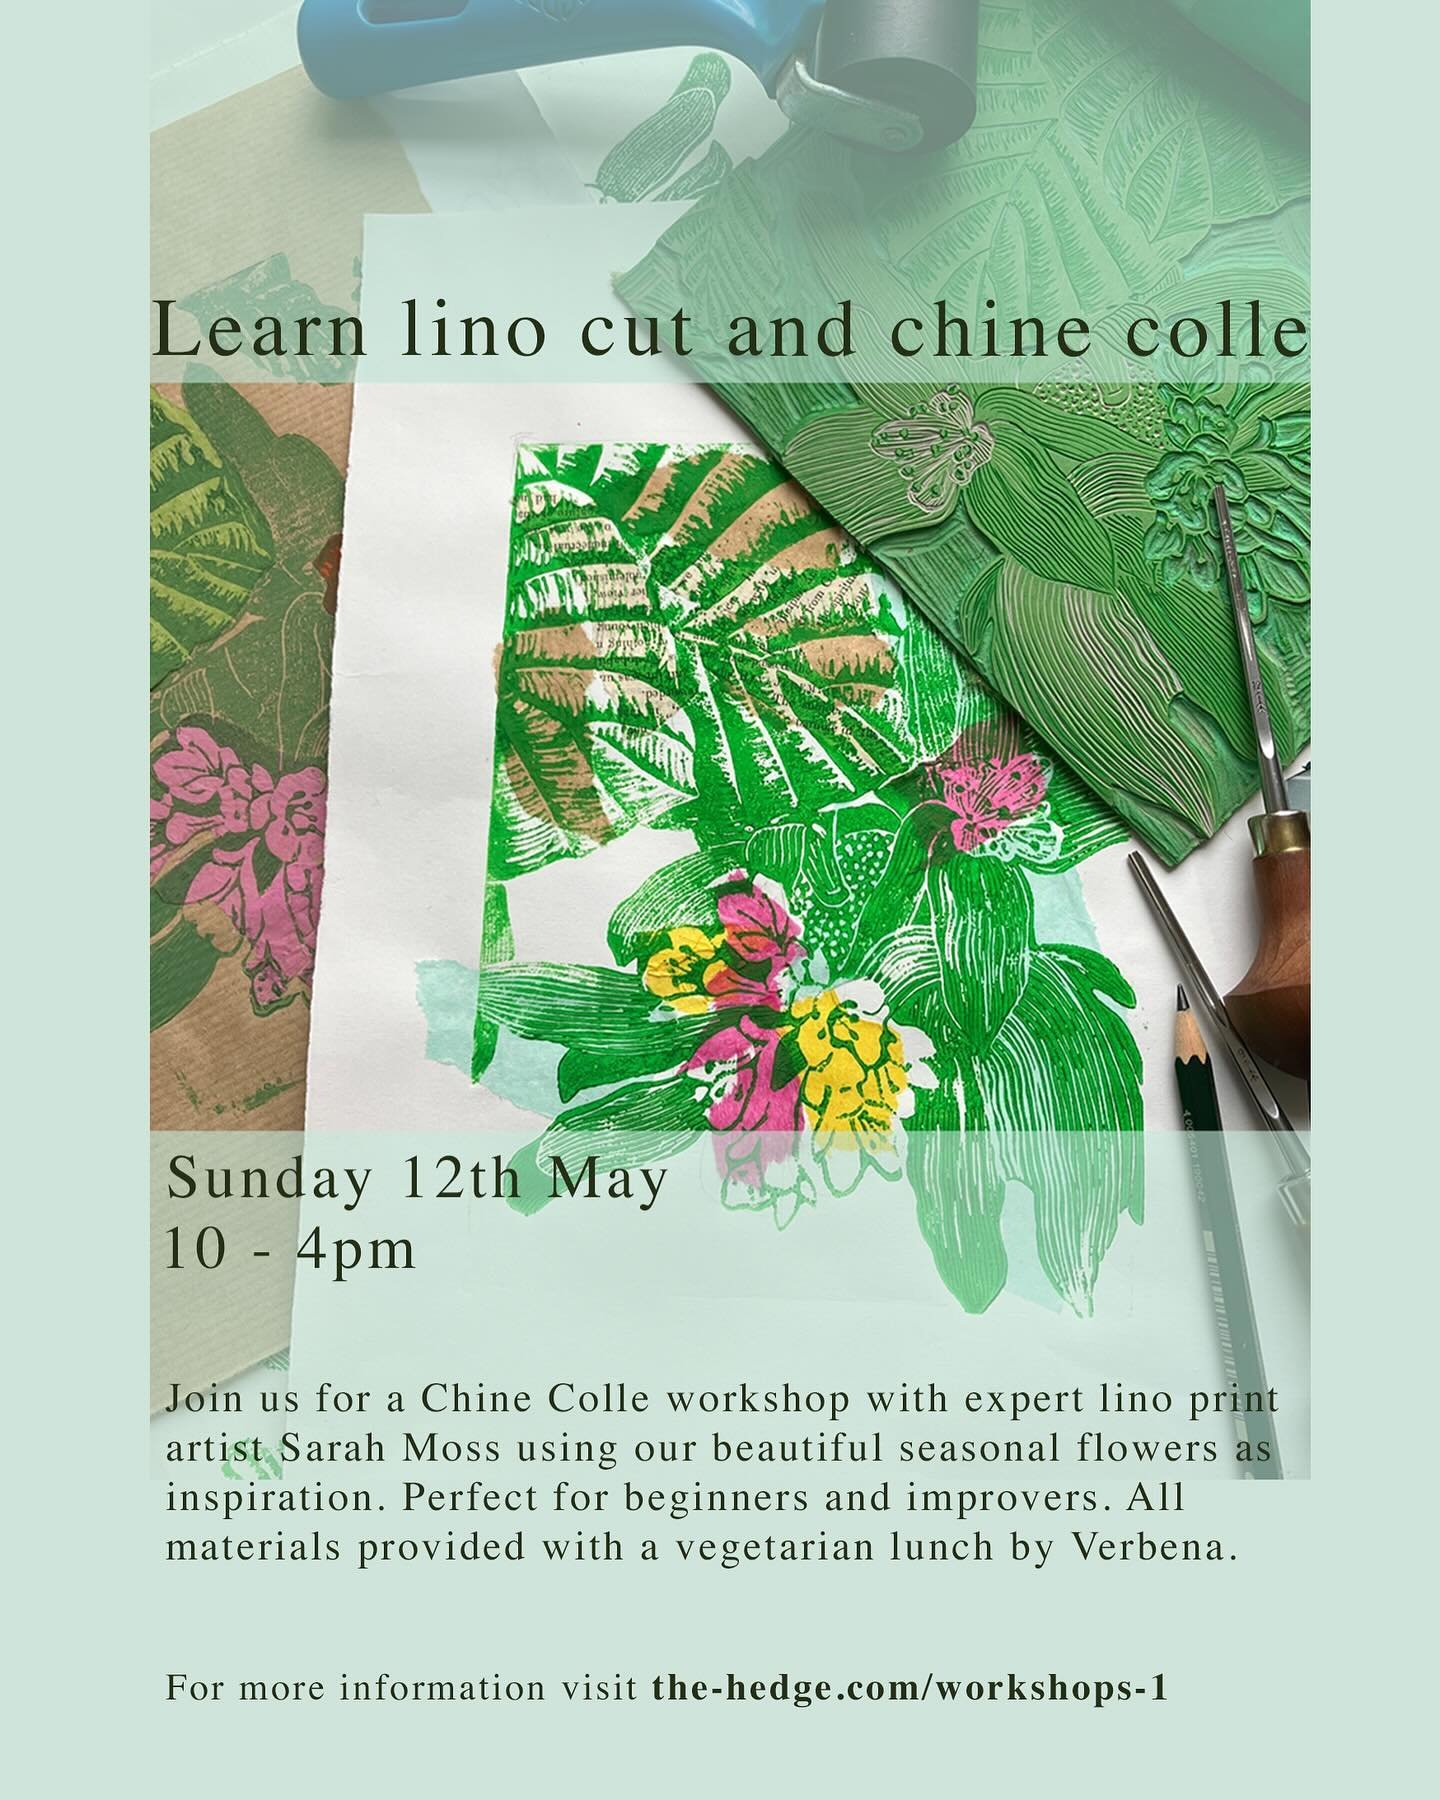 Next Sunday something really special is going on at hedge, an opportunity to join artist and tutor @sarahmoss59 and spend the day learning how to lino cut. 

Lunch will be provided as will all materials. 
.
#micromastery #vivastirchley #workshopsathe